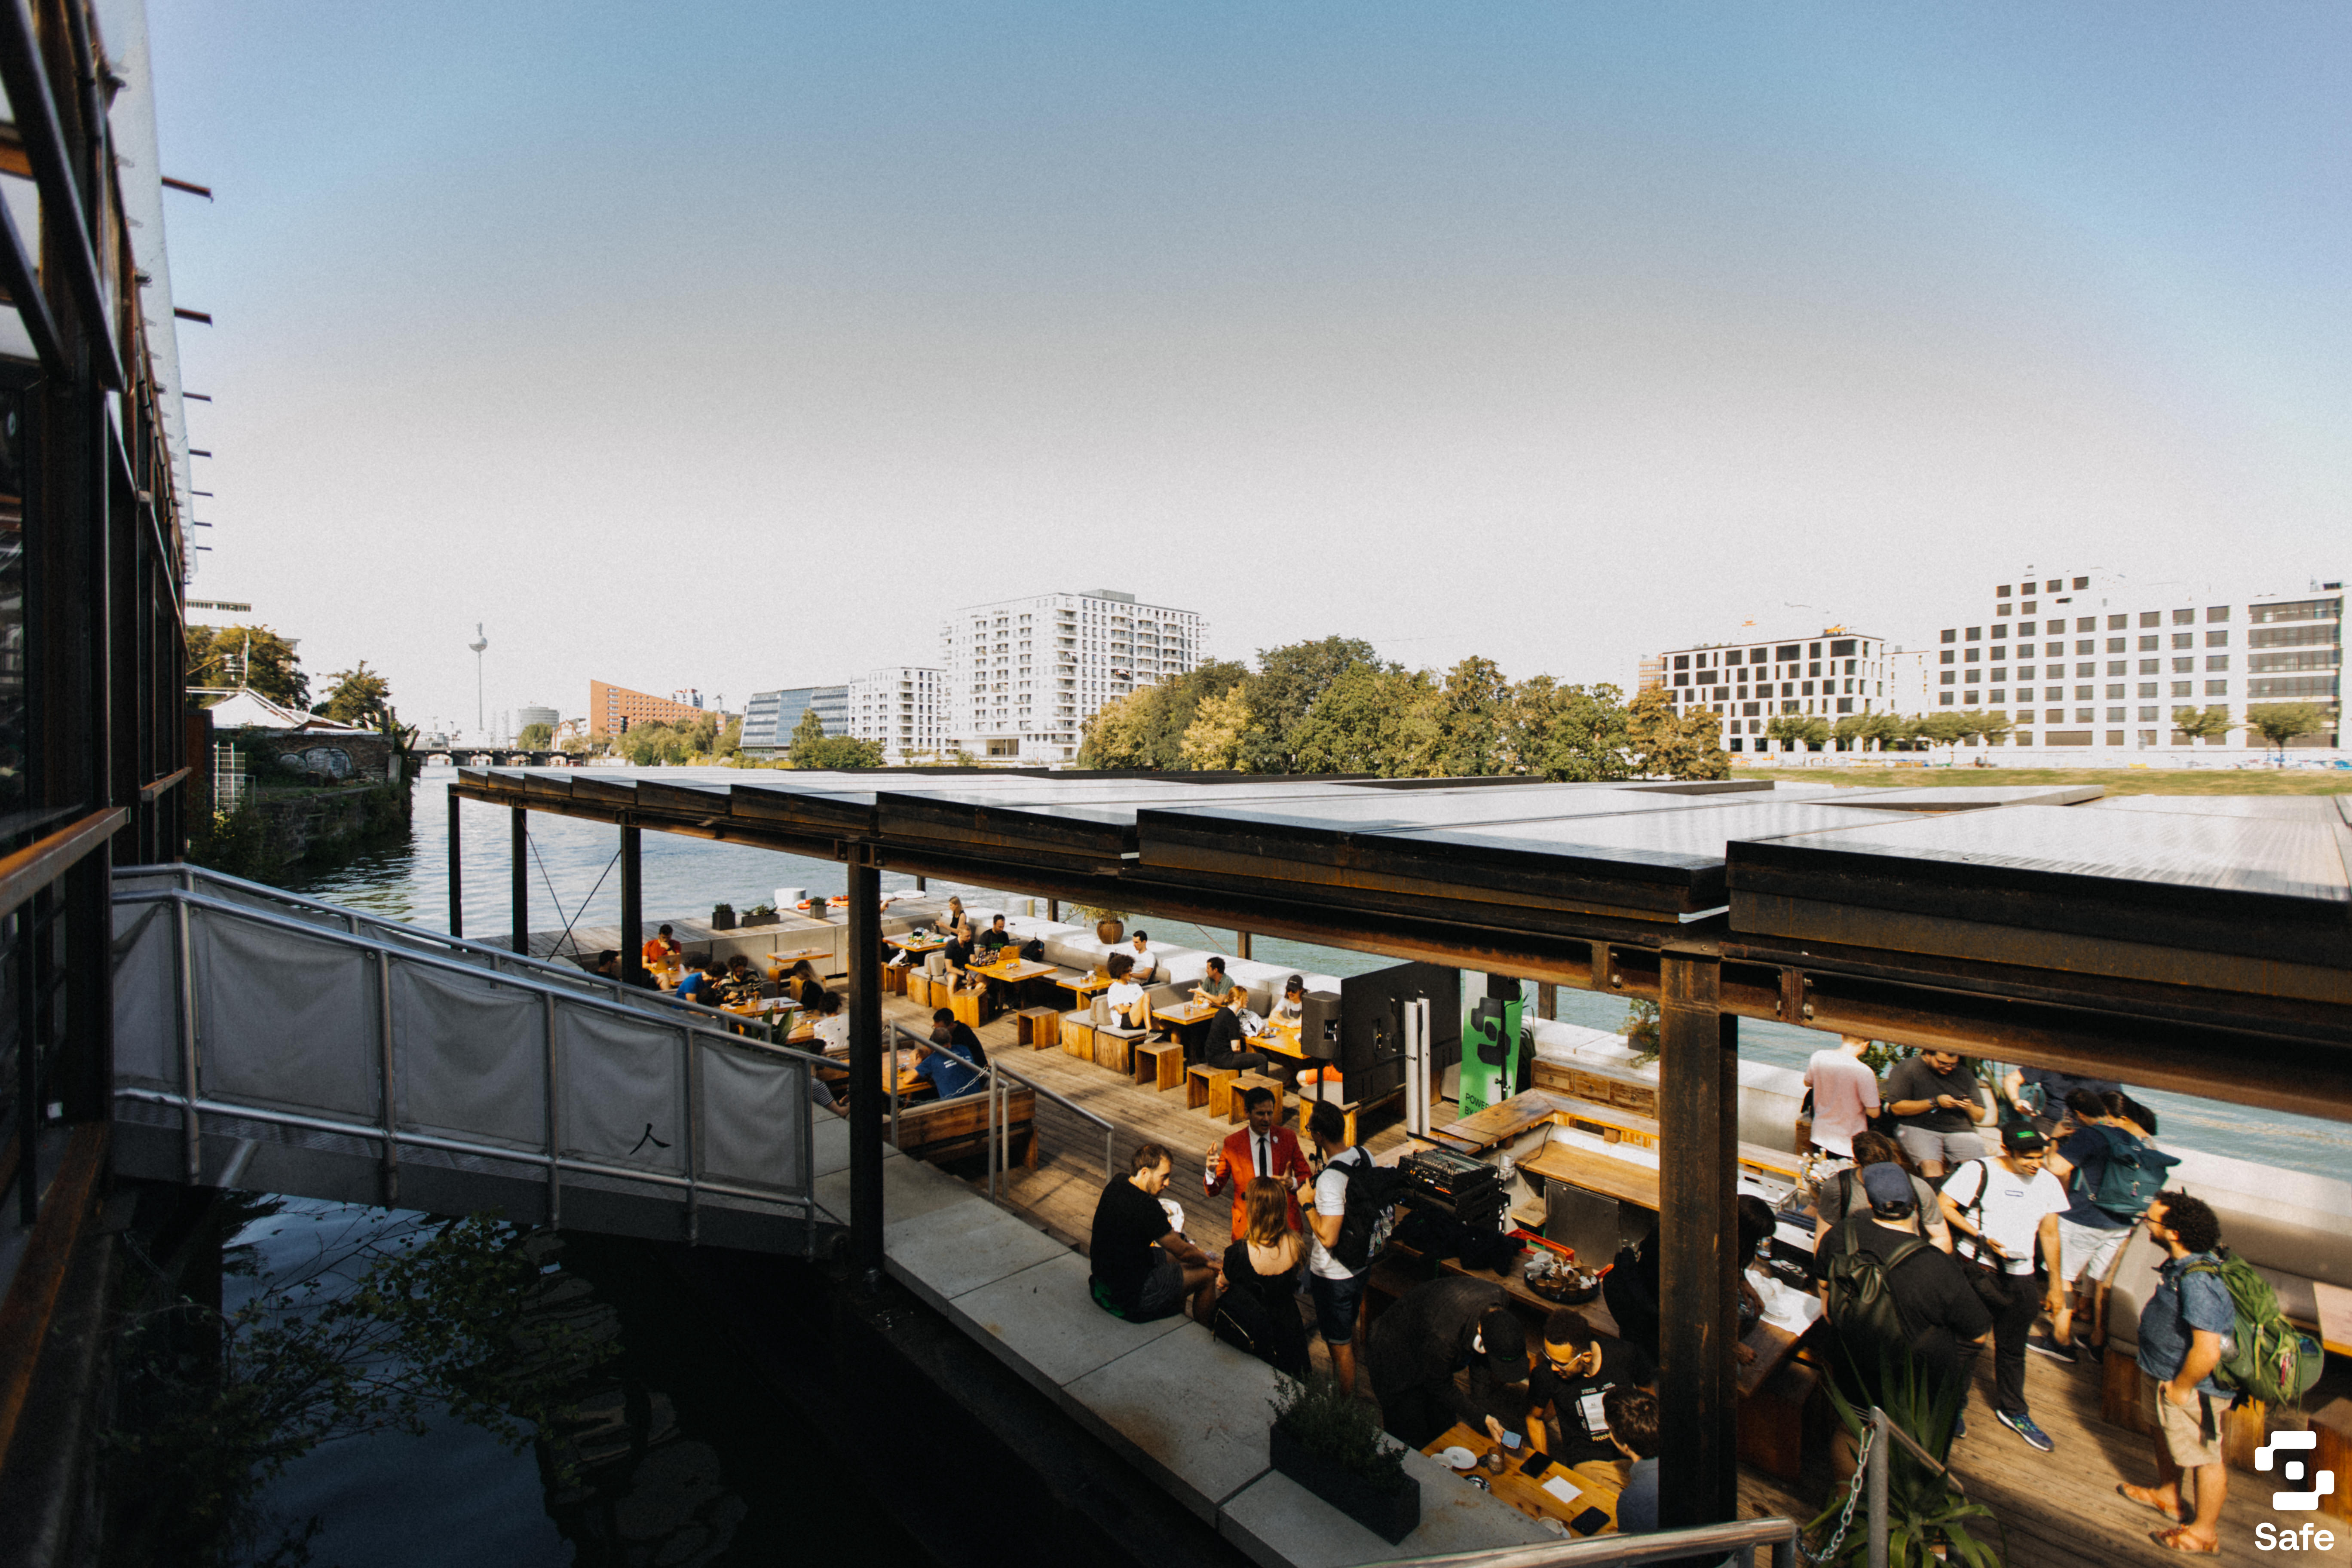 Web3 builders enjoyed hanging out in a chilled setting along the Spree at their dedicated Developer's Lounge.